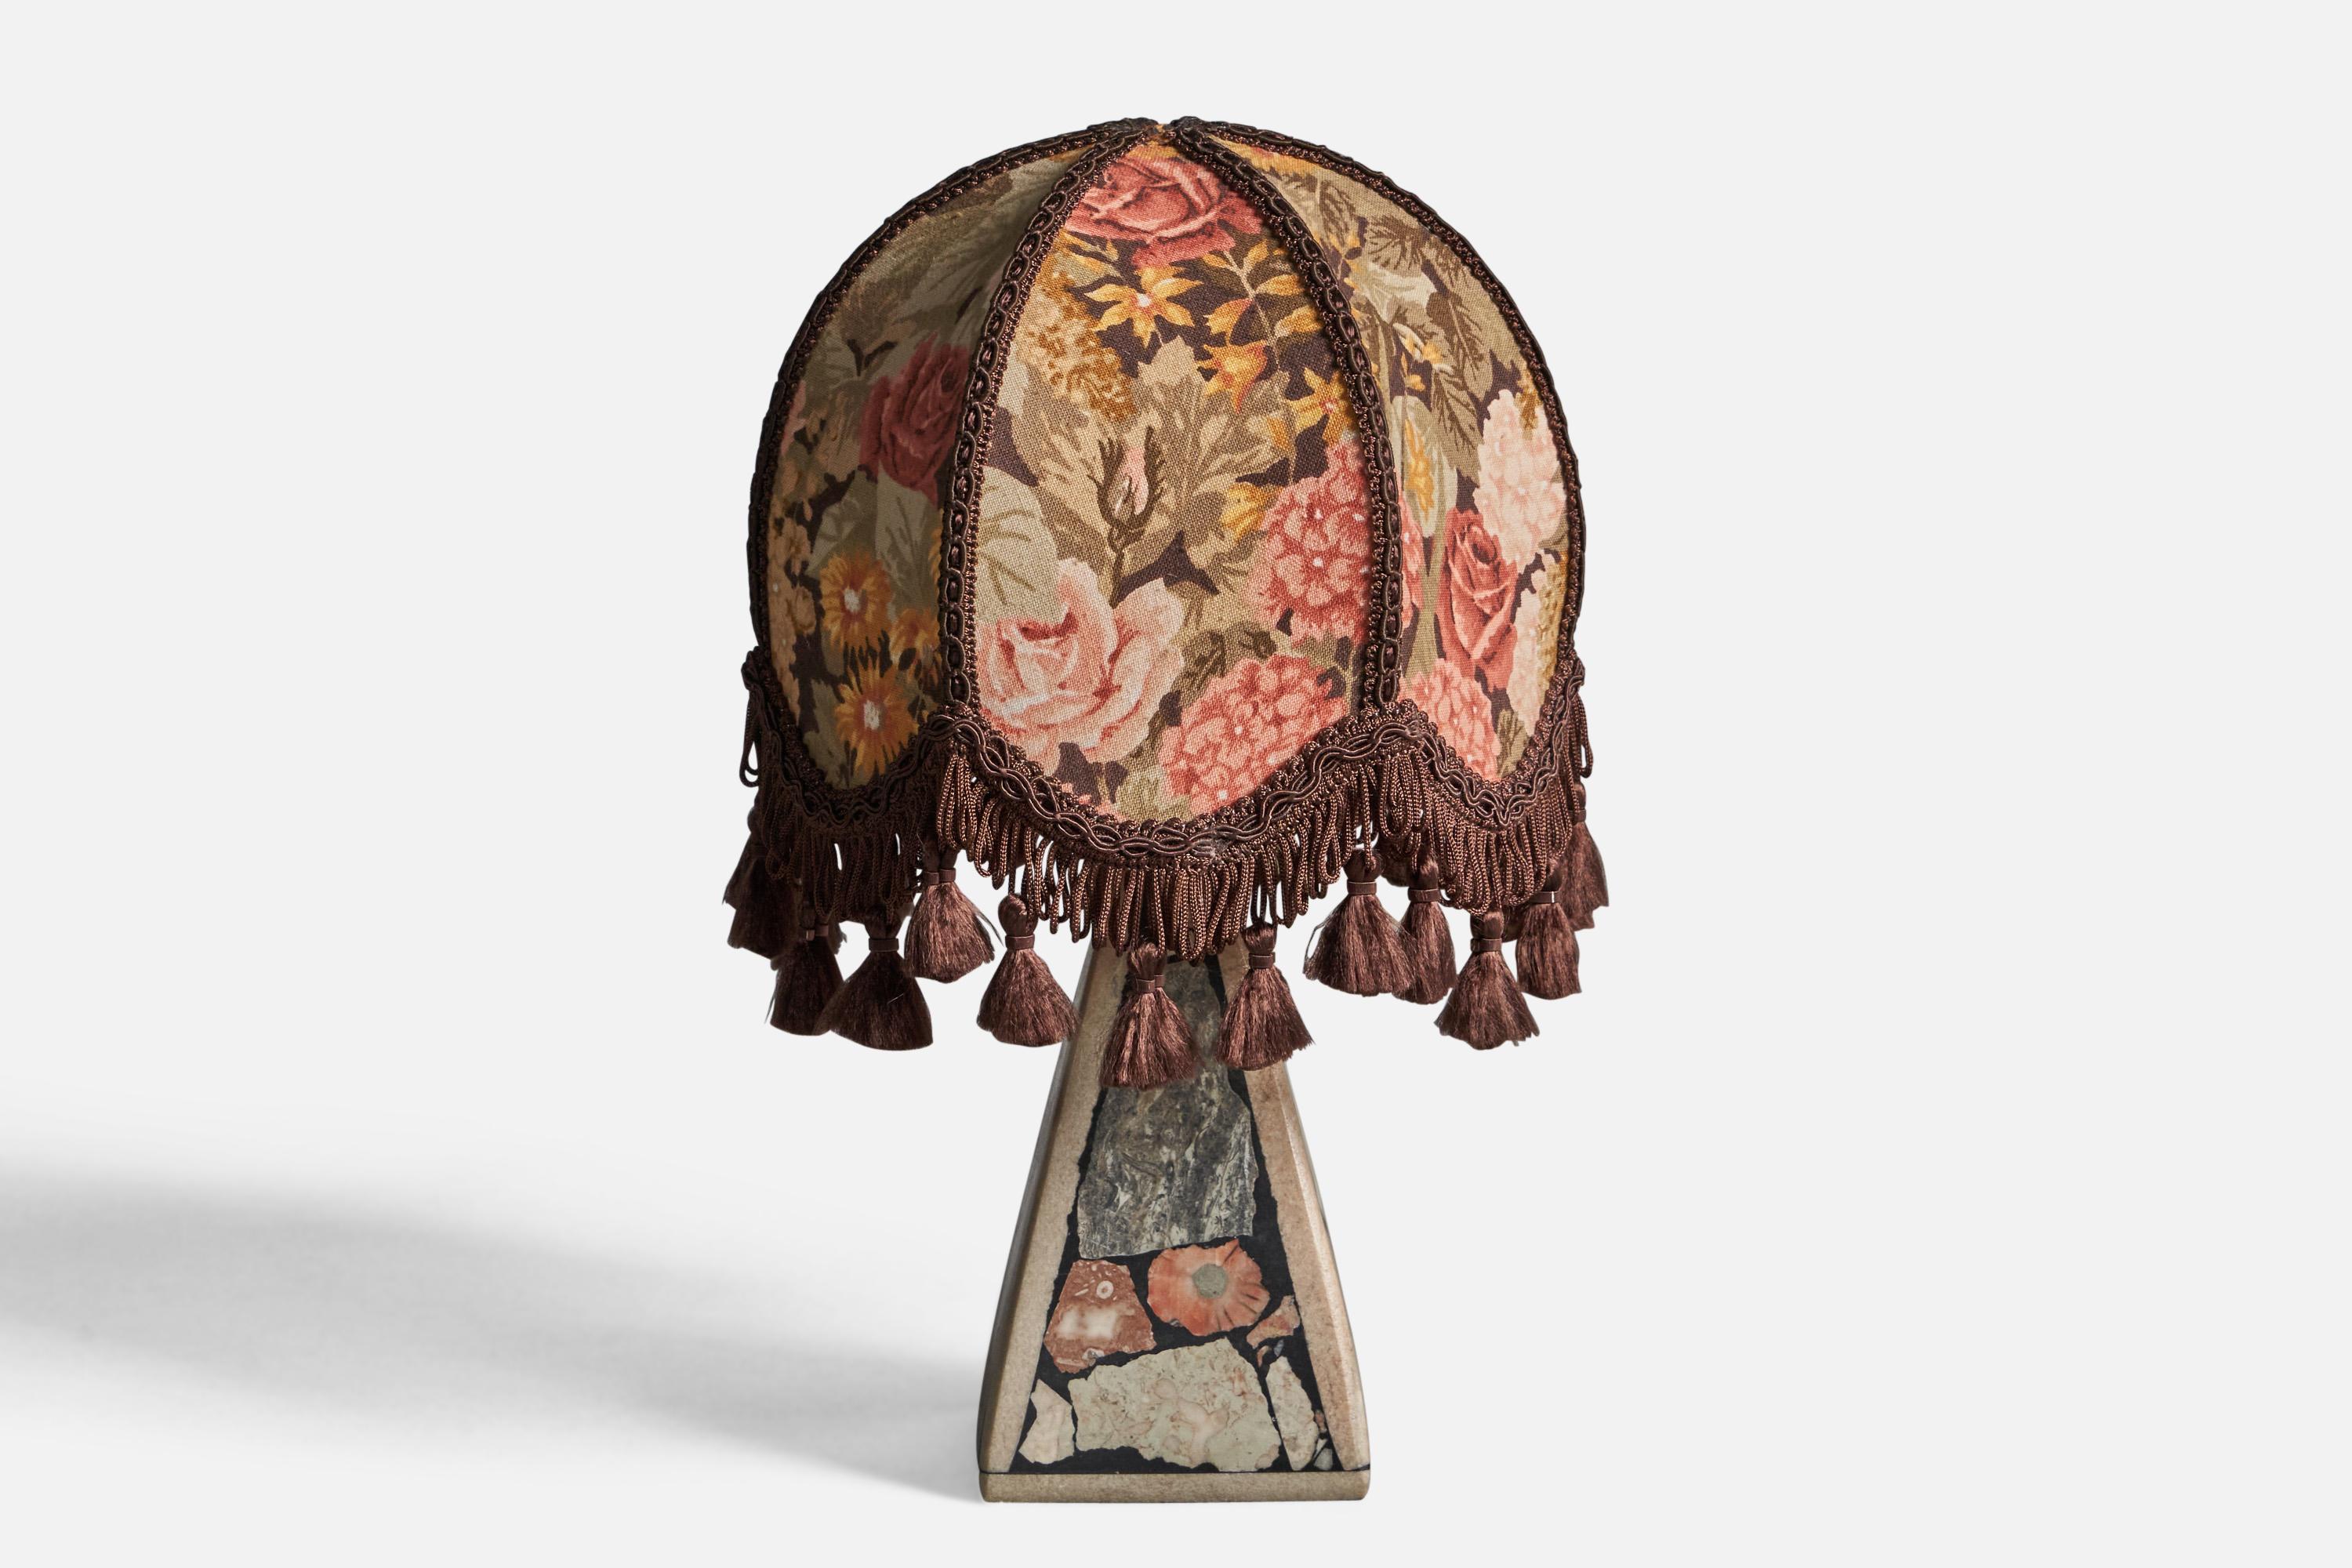 A fossil stone and floral-printed fabric table lamp, designed and produced in Sweden, c. 1970s.

Overall Dimensions (inches): 10